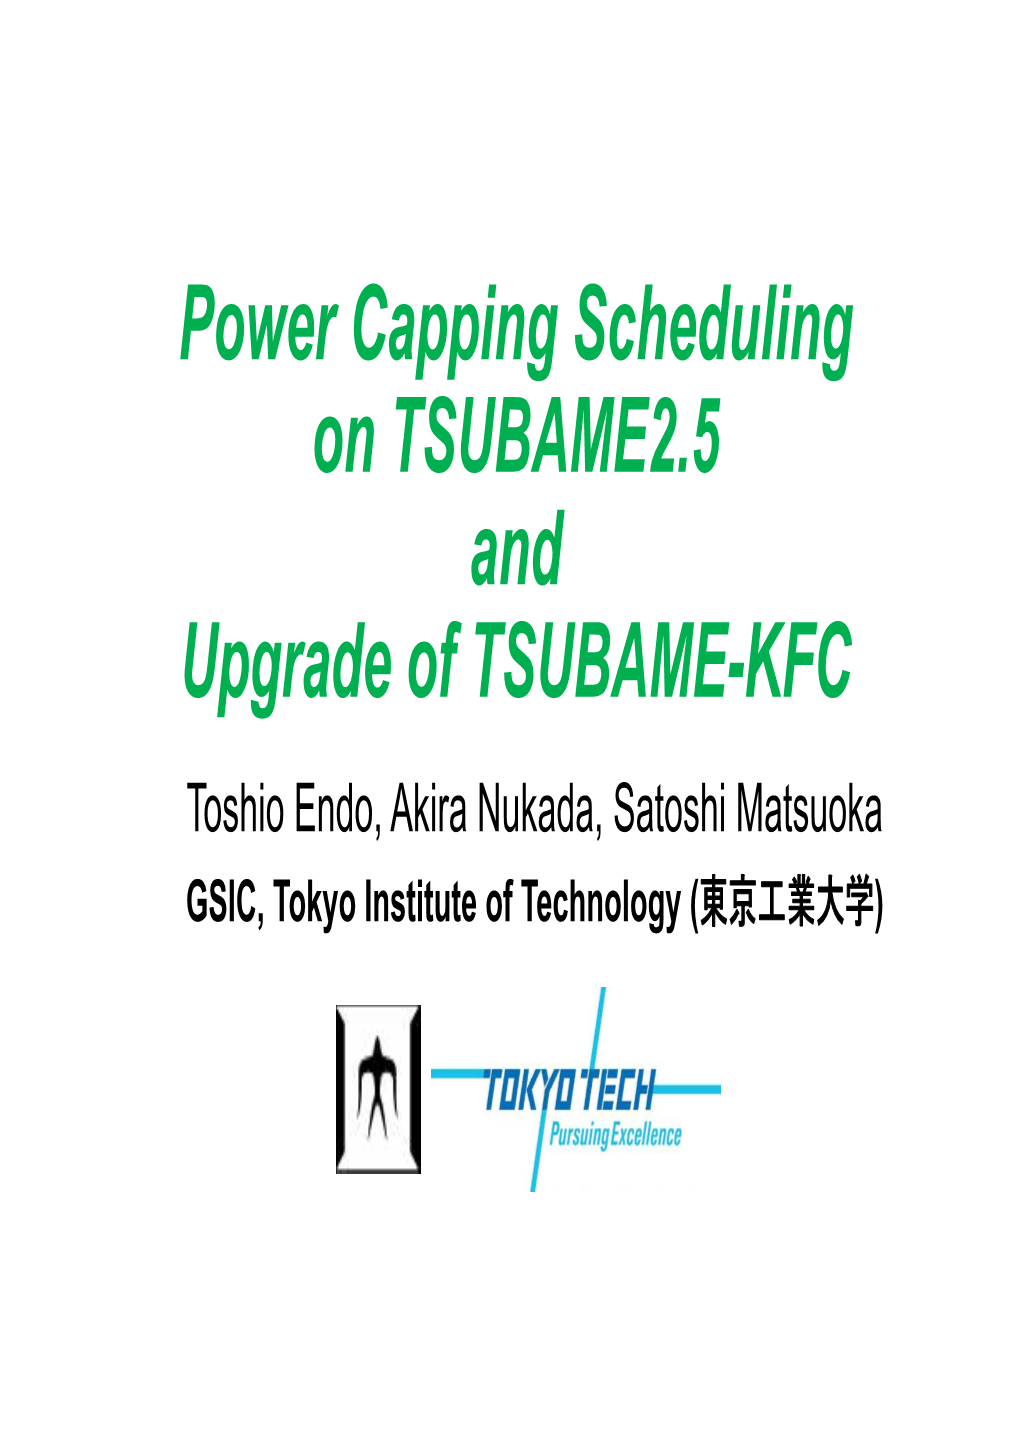 Power Capping Scheduling on TSUBAME2.5 and Upgrade of TSUBAME-KFC